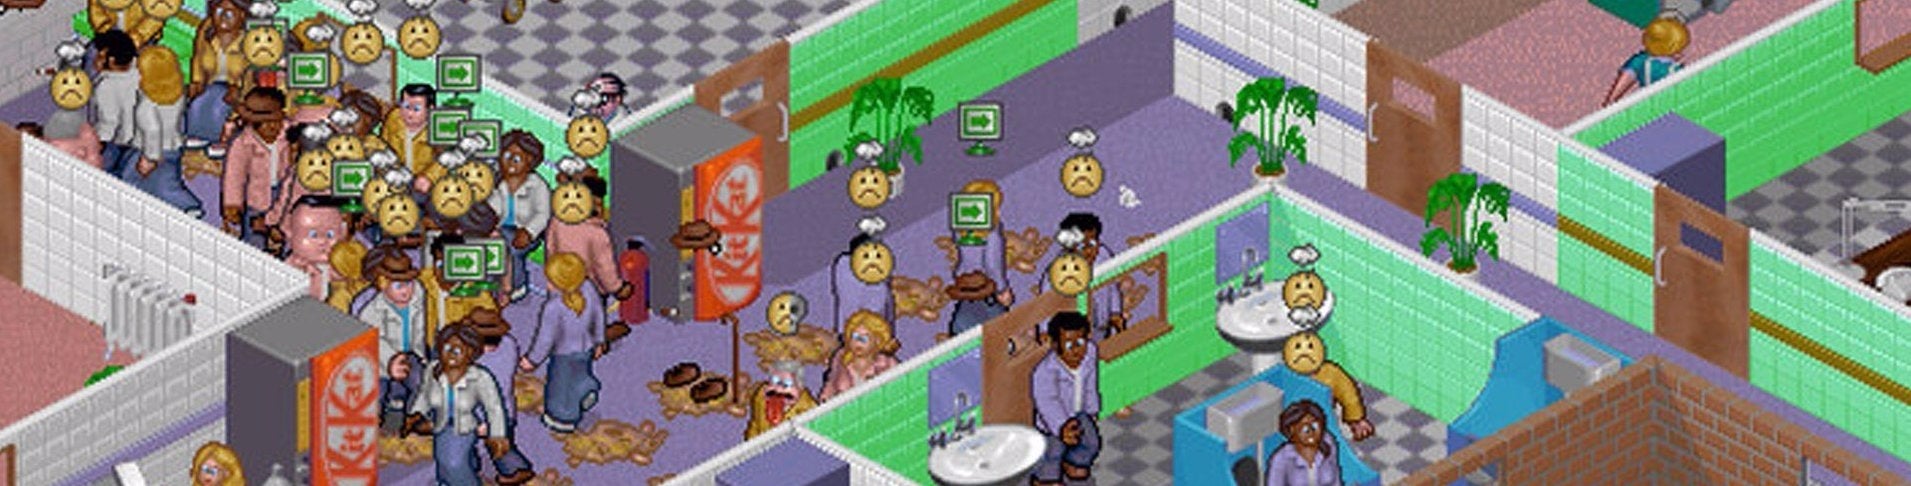 Image for Watch: Aoife plays Theme Hospital for the first time, gets very angry